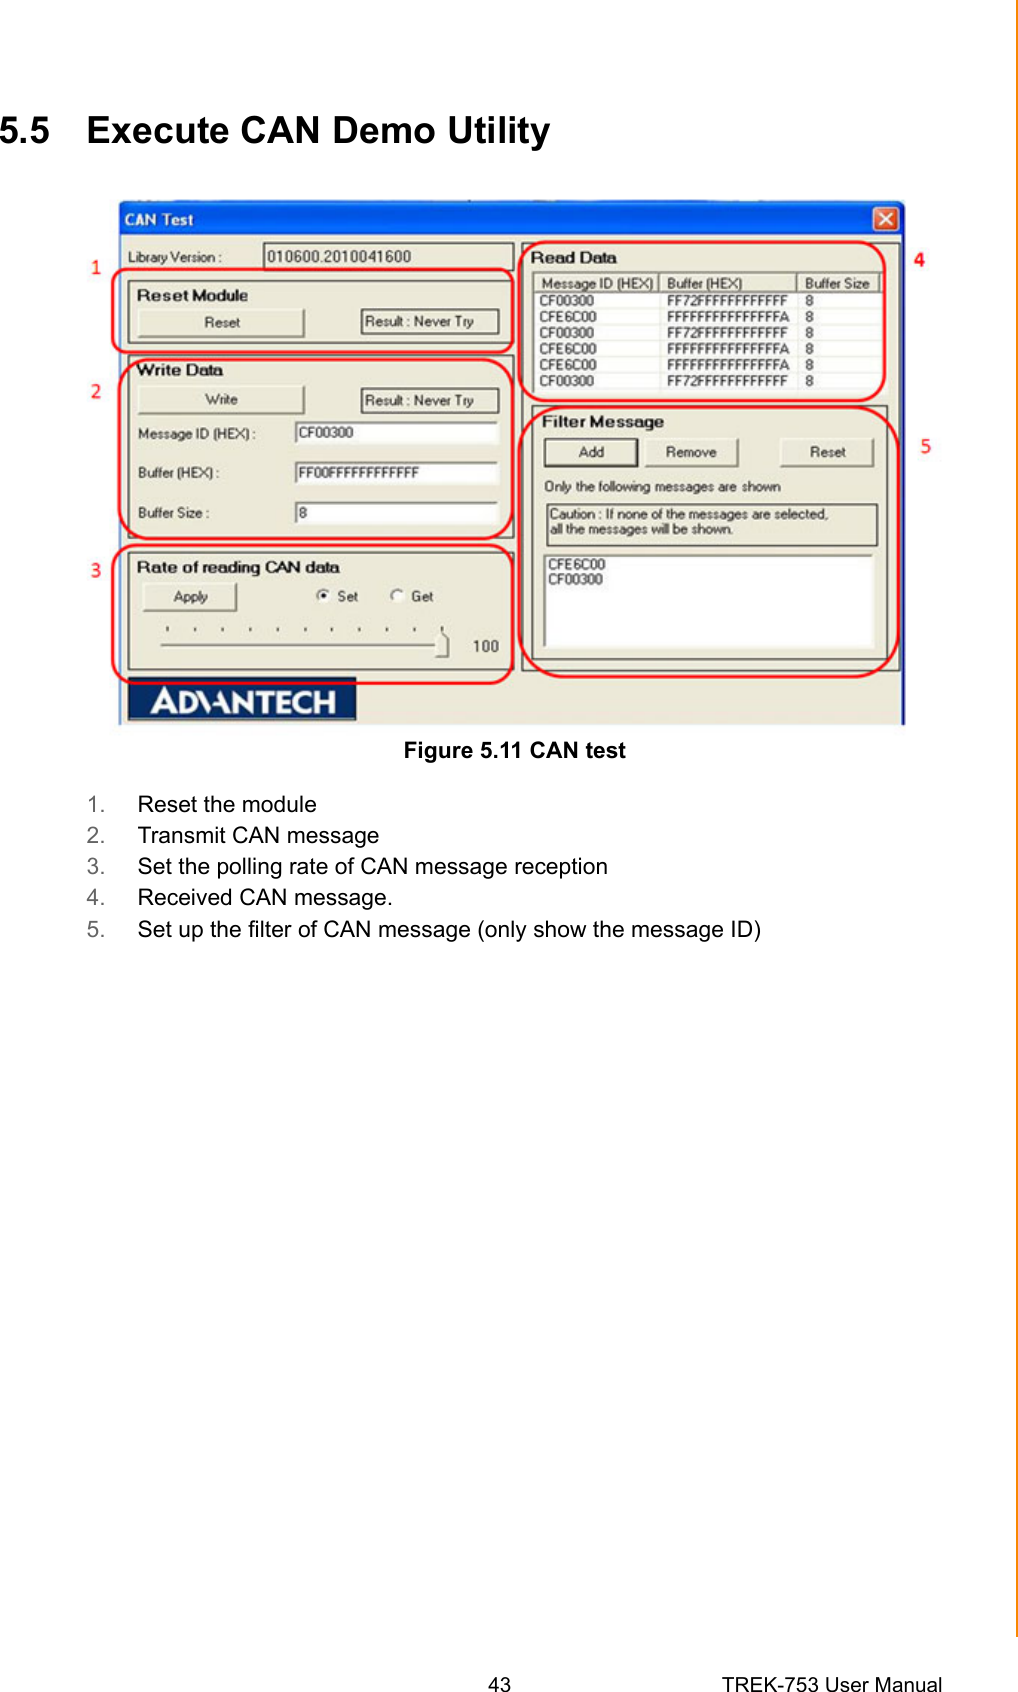 43 TREK-753 User ManualChapter 5 Software Demo Utility Setup5.5 Execute CAN Demo UtilityFigure 5.11 CAN test1. Reset the module2. Transmit CAN message3. Set the polling rate of CAN message reception4. Received CAN message.5. Set up the filter of CAN message (only show the message ID)